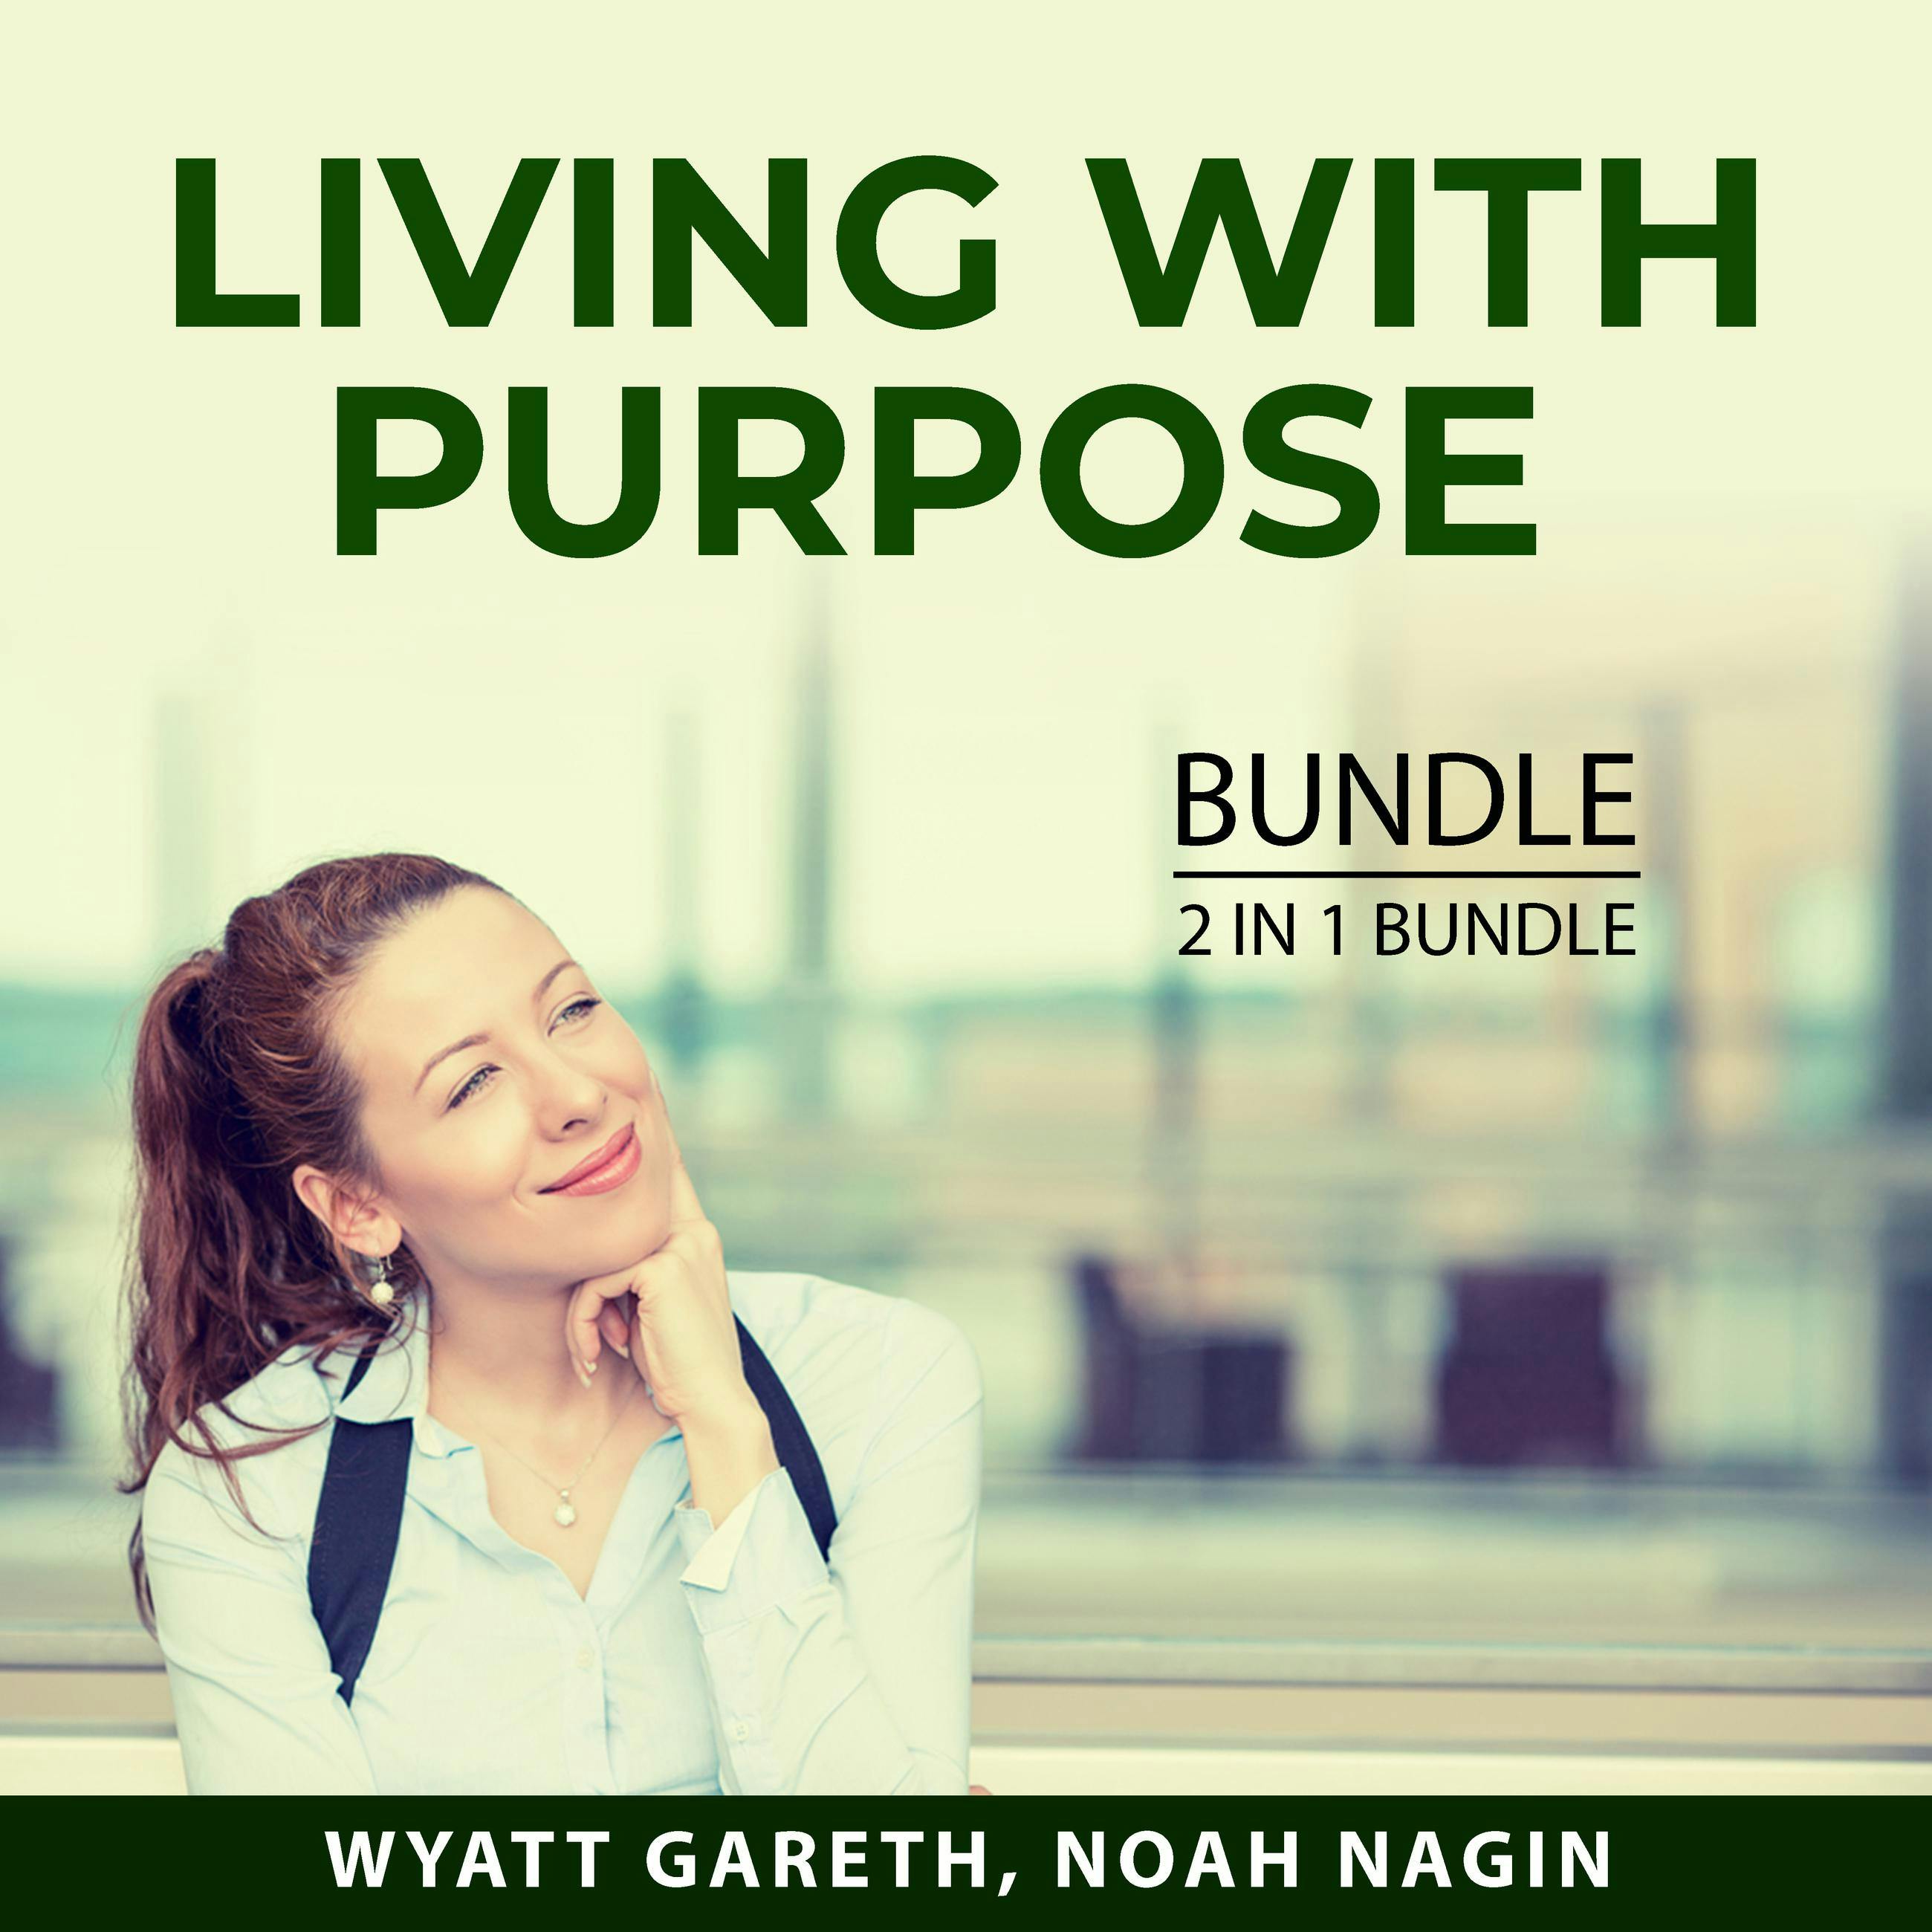 Living With Purpose Bundle, 2 in 1 Bundle: Purposeful Life and Living a Meaningful Life - undefined